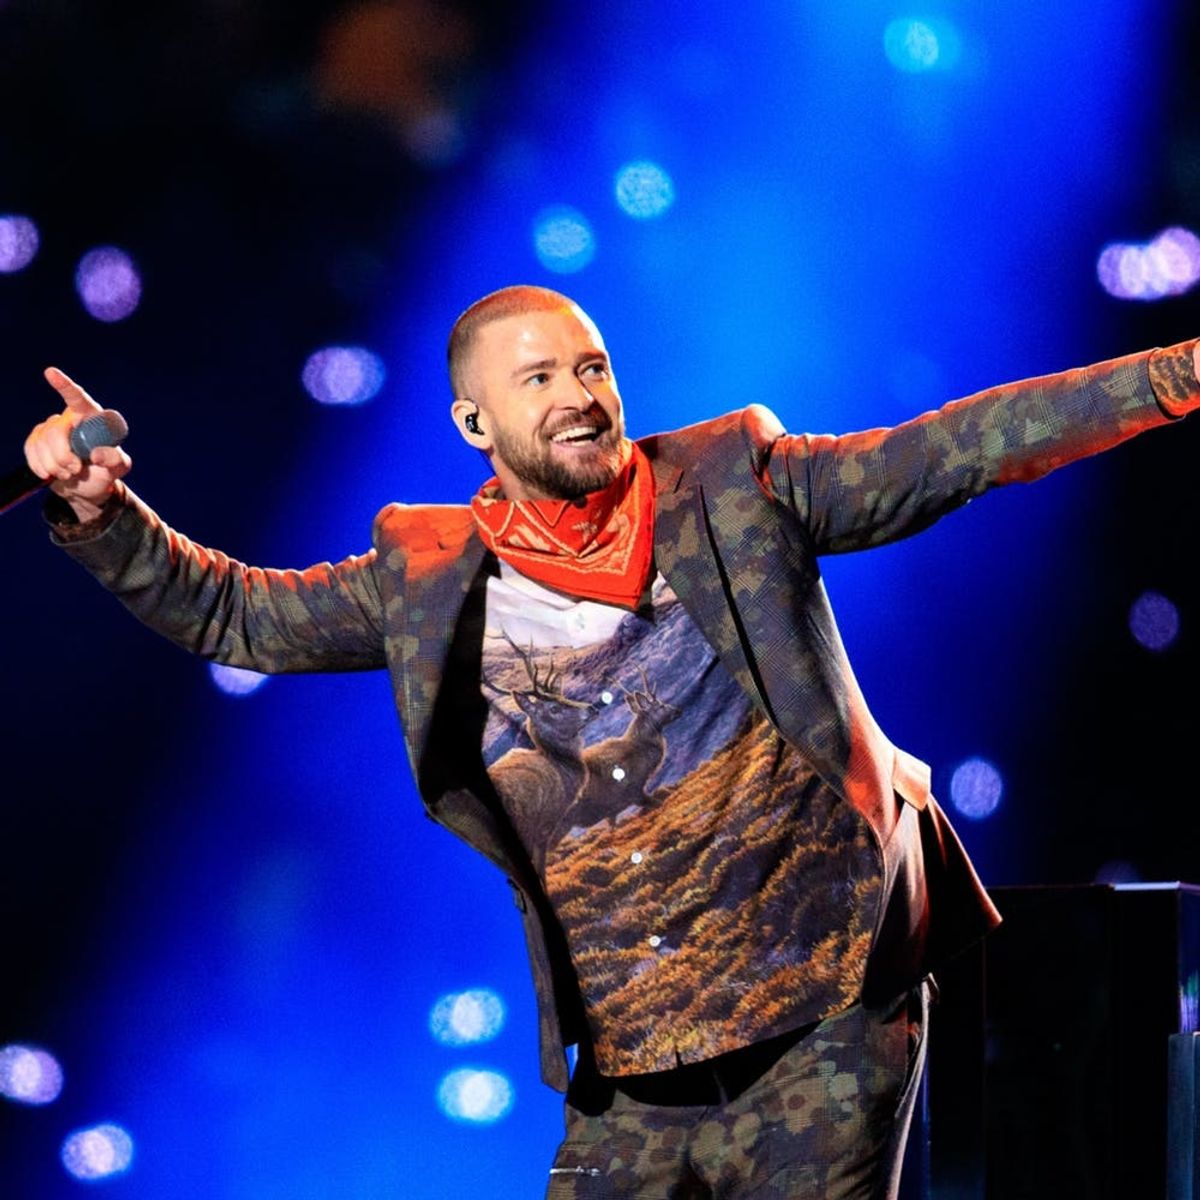 Justin Timberlake’s Superbowl Suit Is Stirring Up Some Mixed Feelings